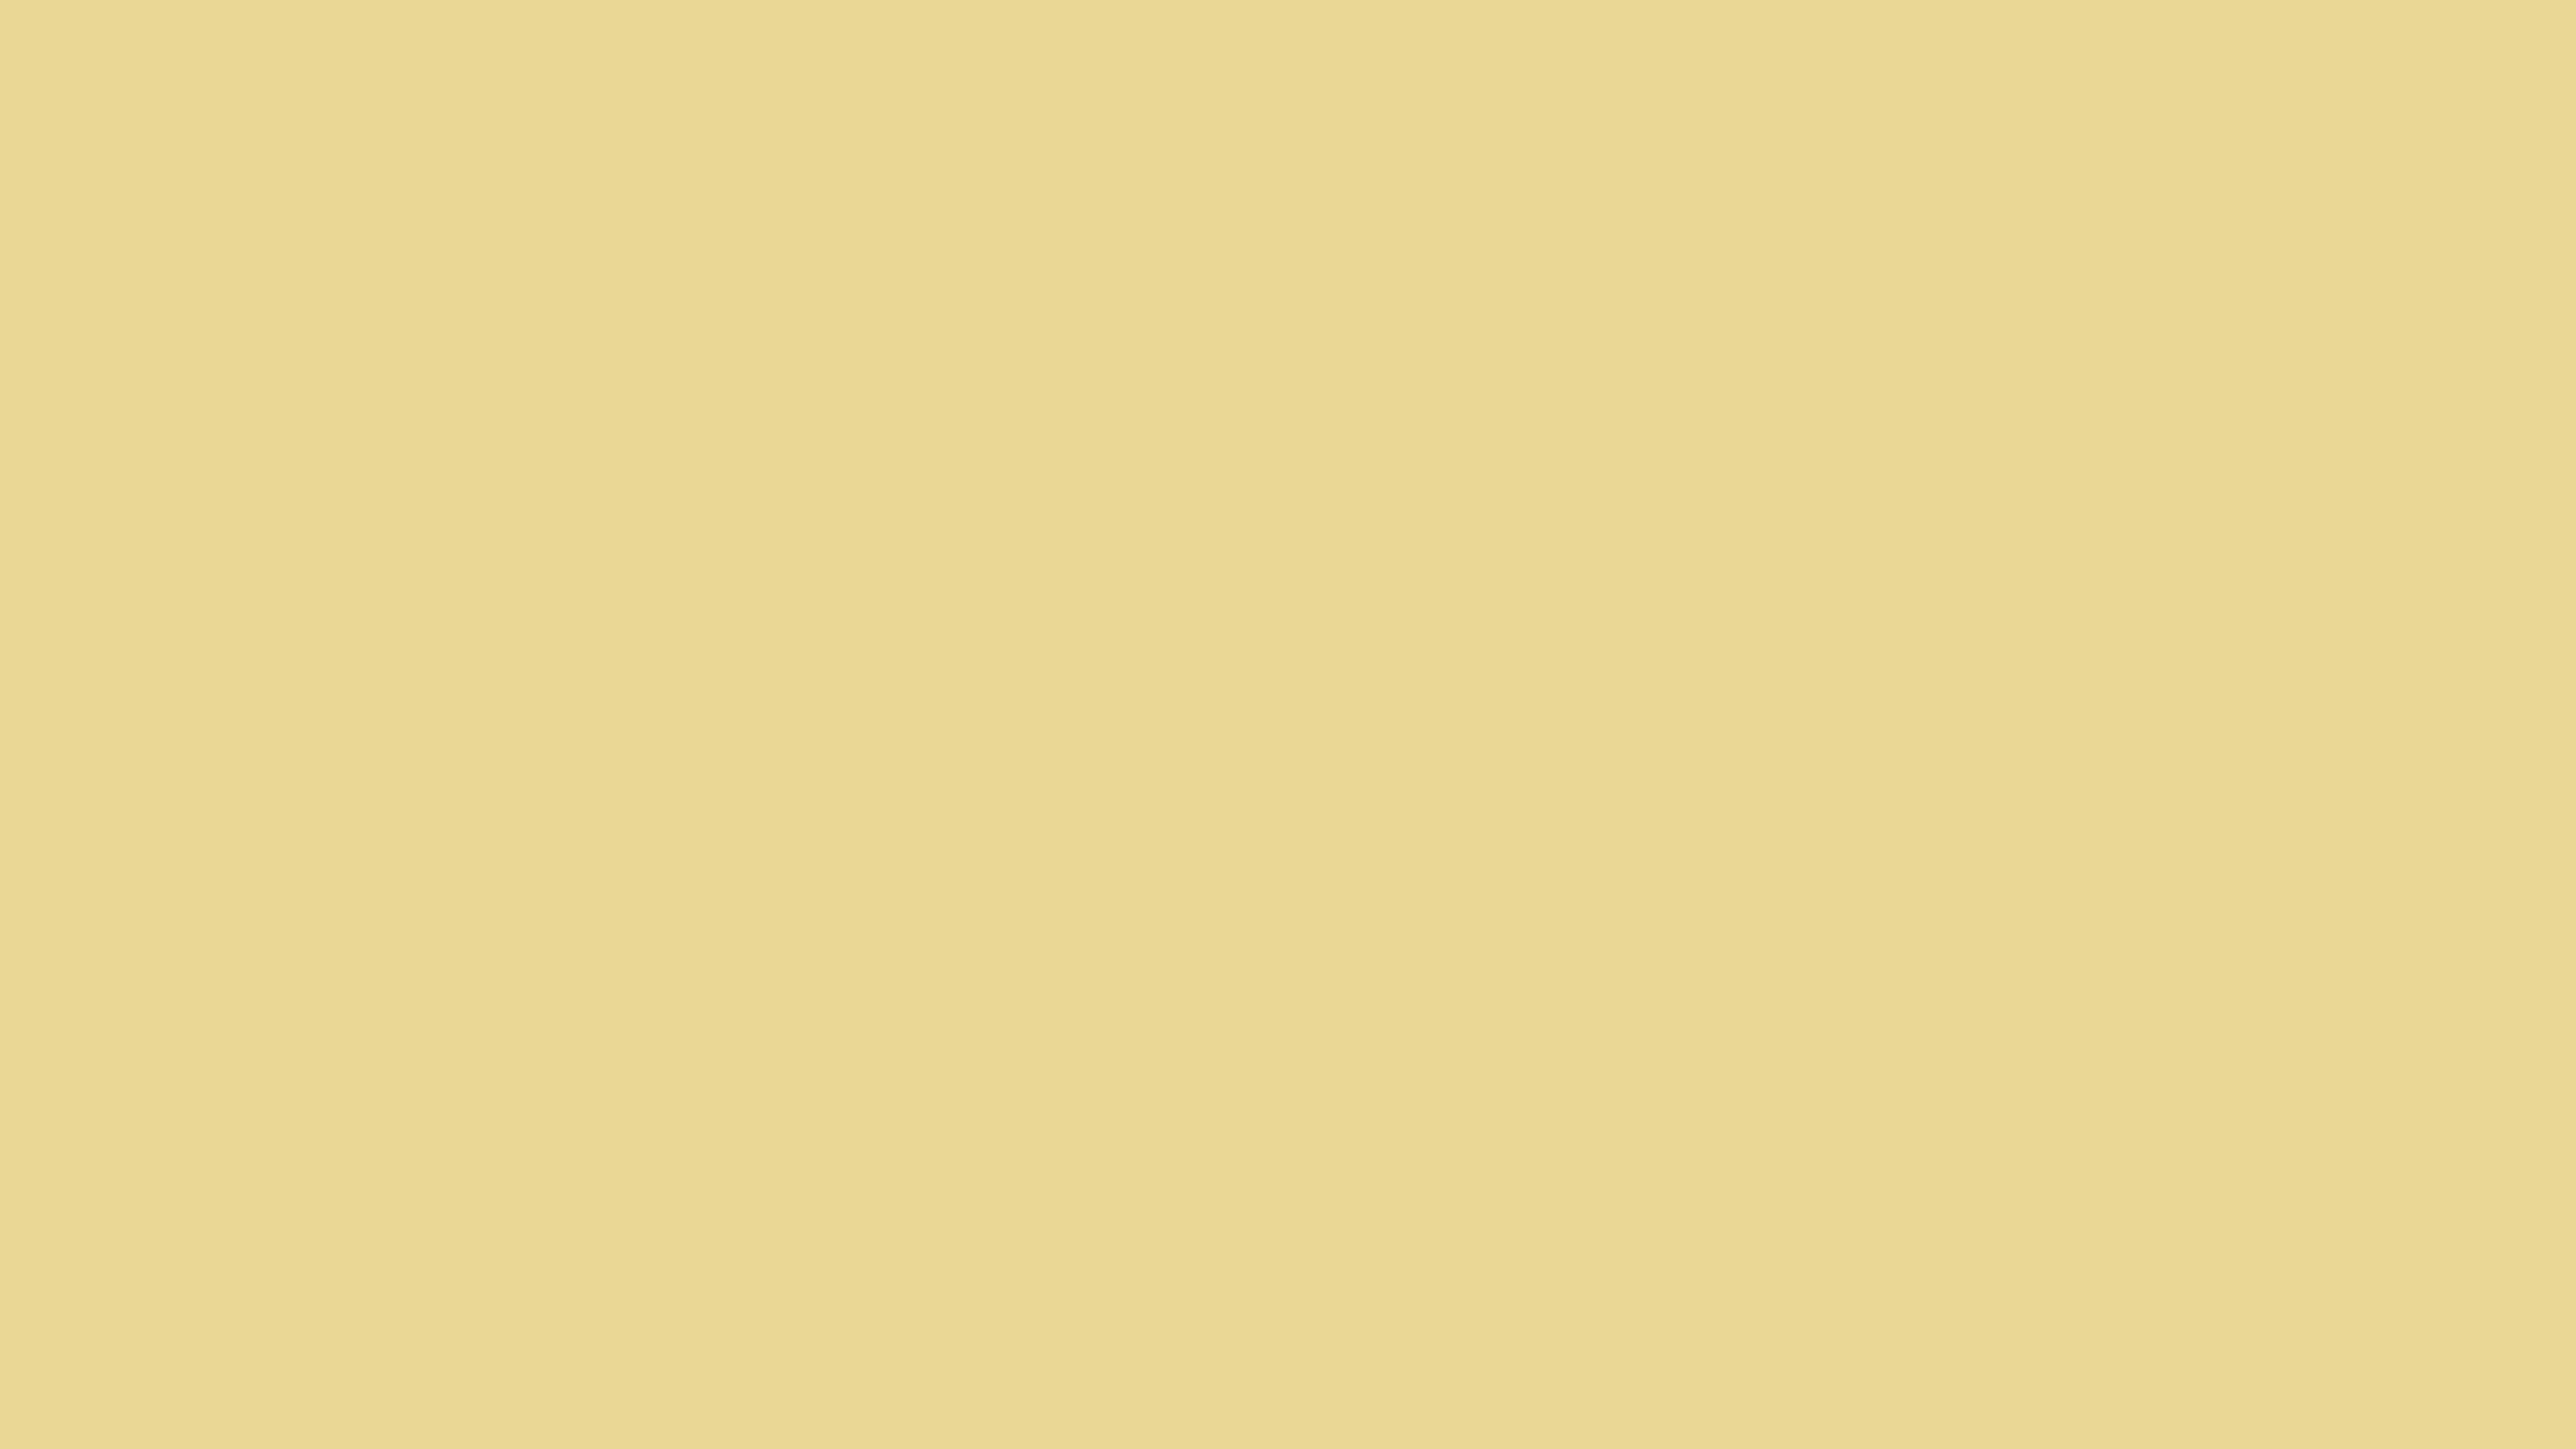 Tainted Gold Solid Color Background Image | Free Image Generator